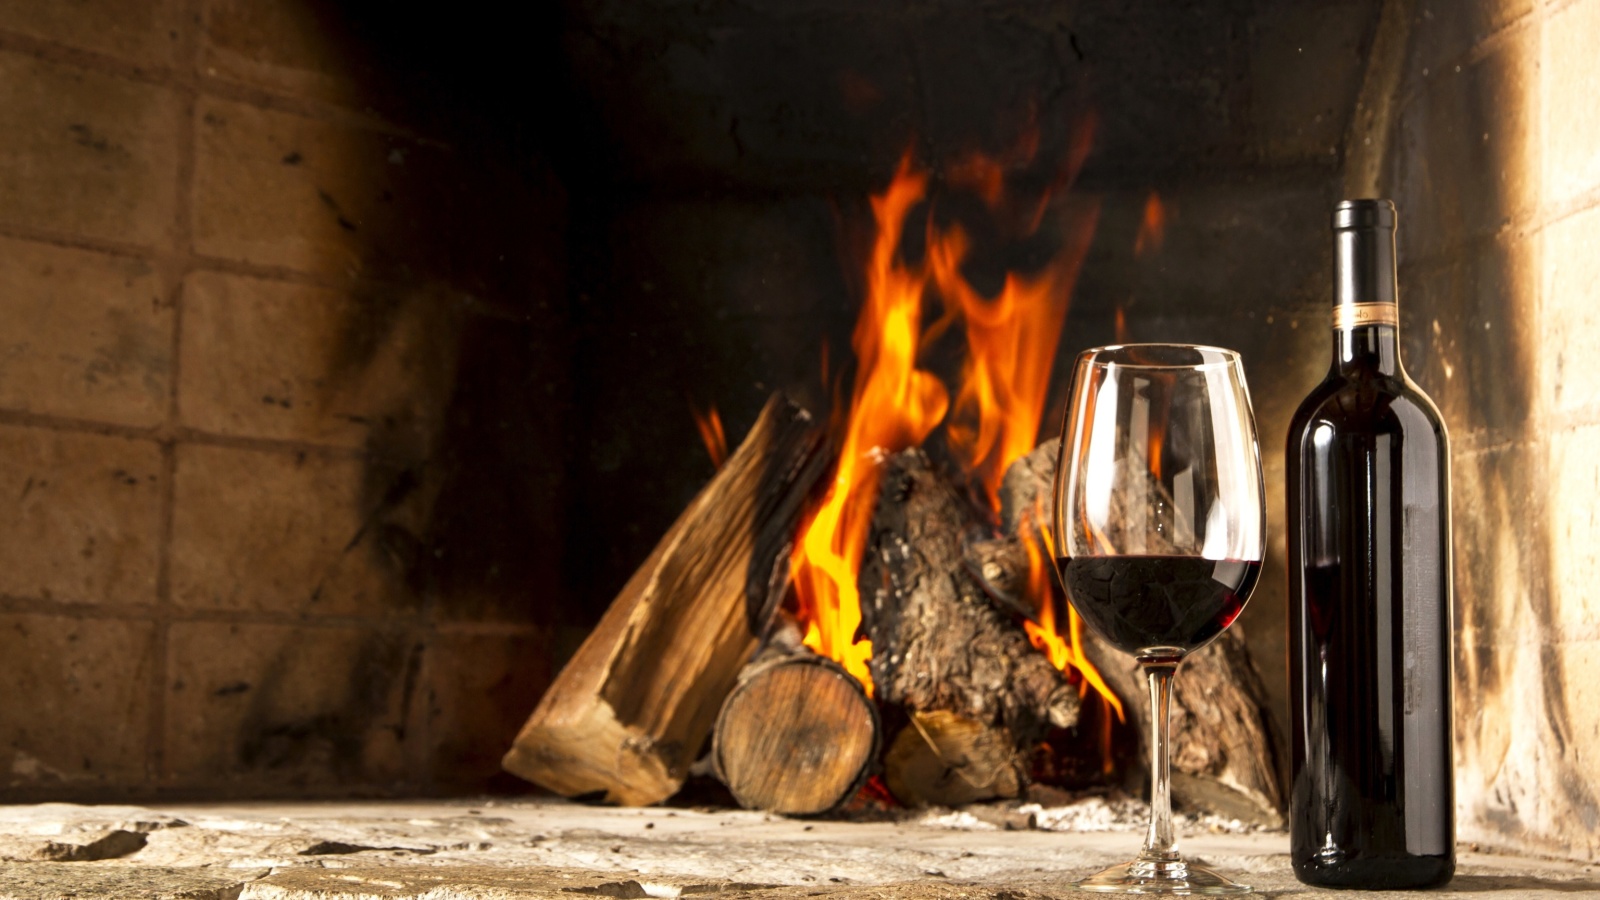 Das Wine and fireplace Wallpaper 1600x900